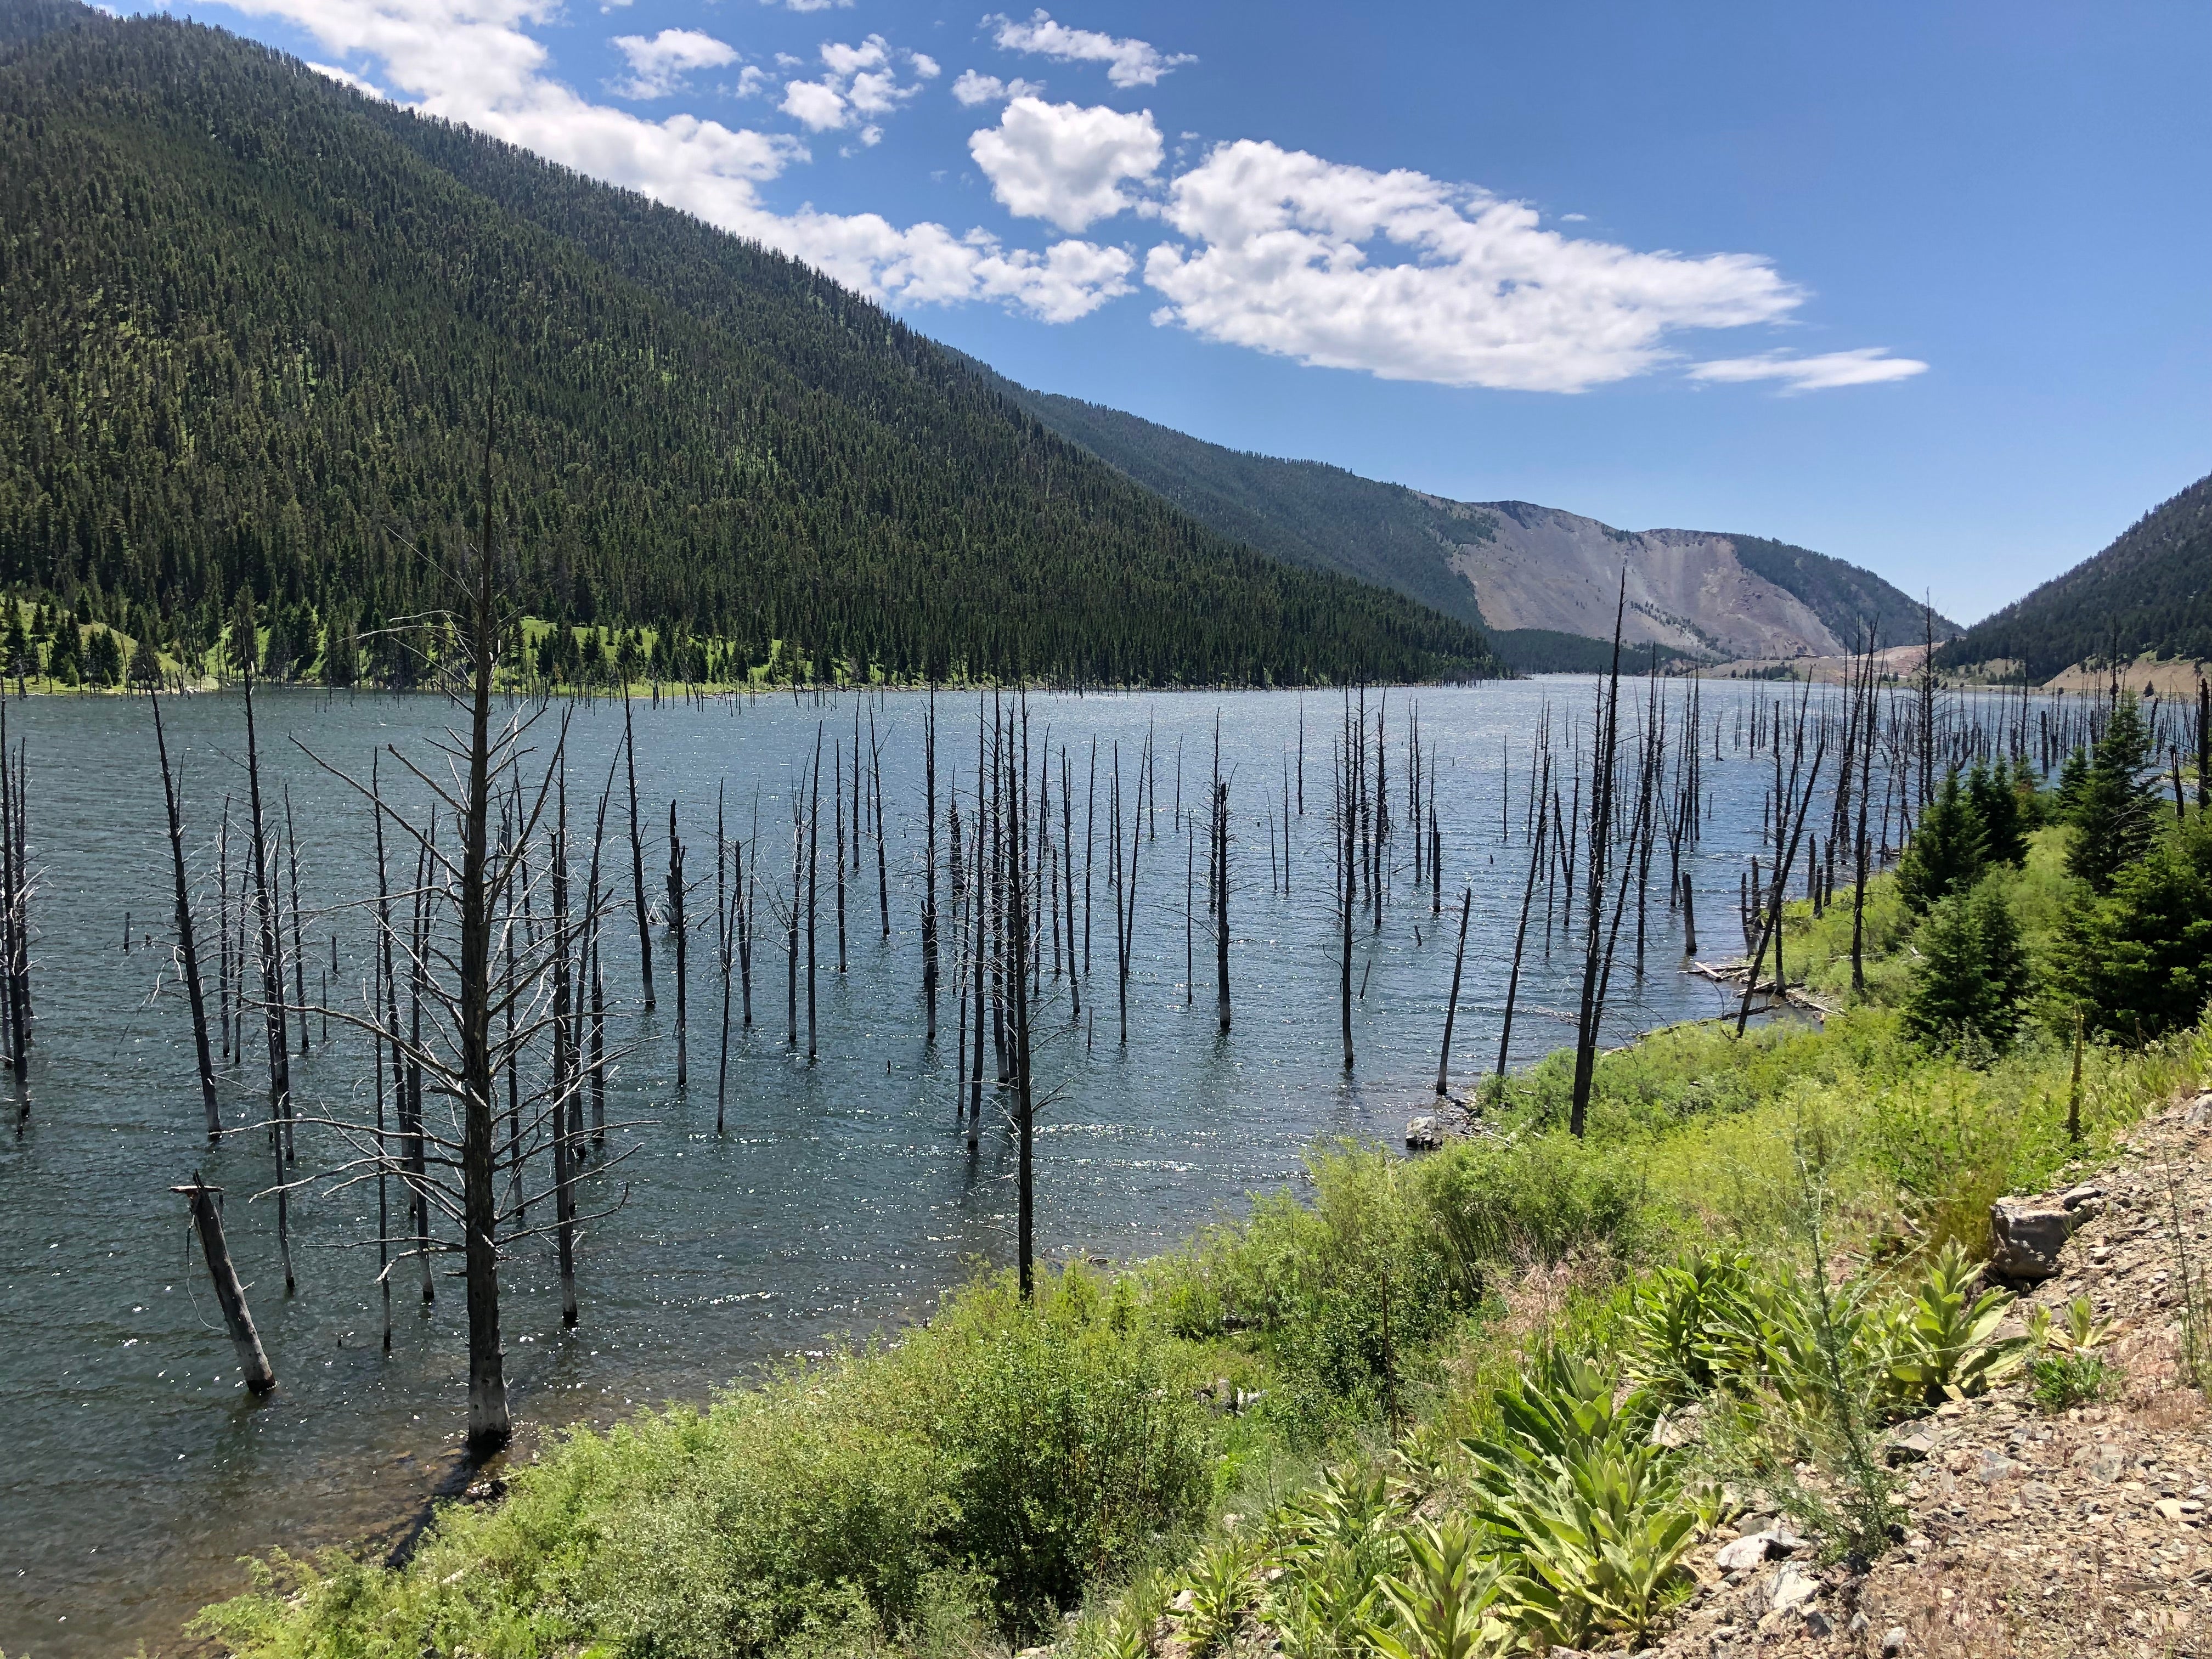 Earthquake Lake is a short drive from the campground and the history is both fascinating and tragic